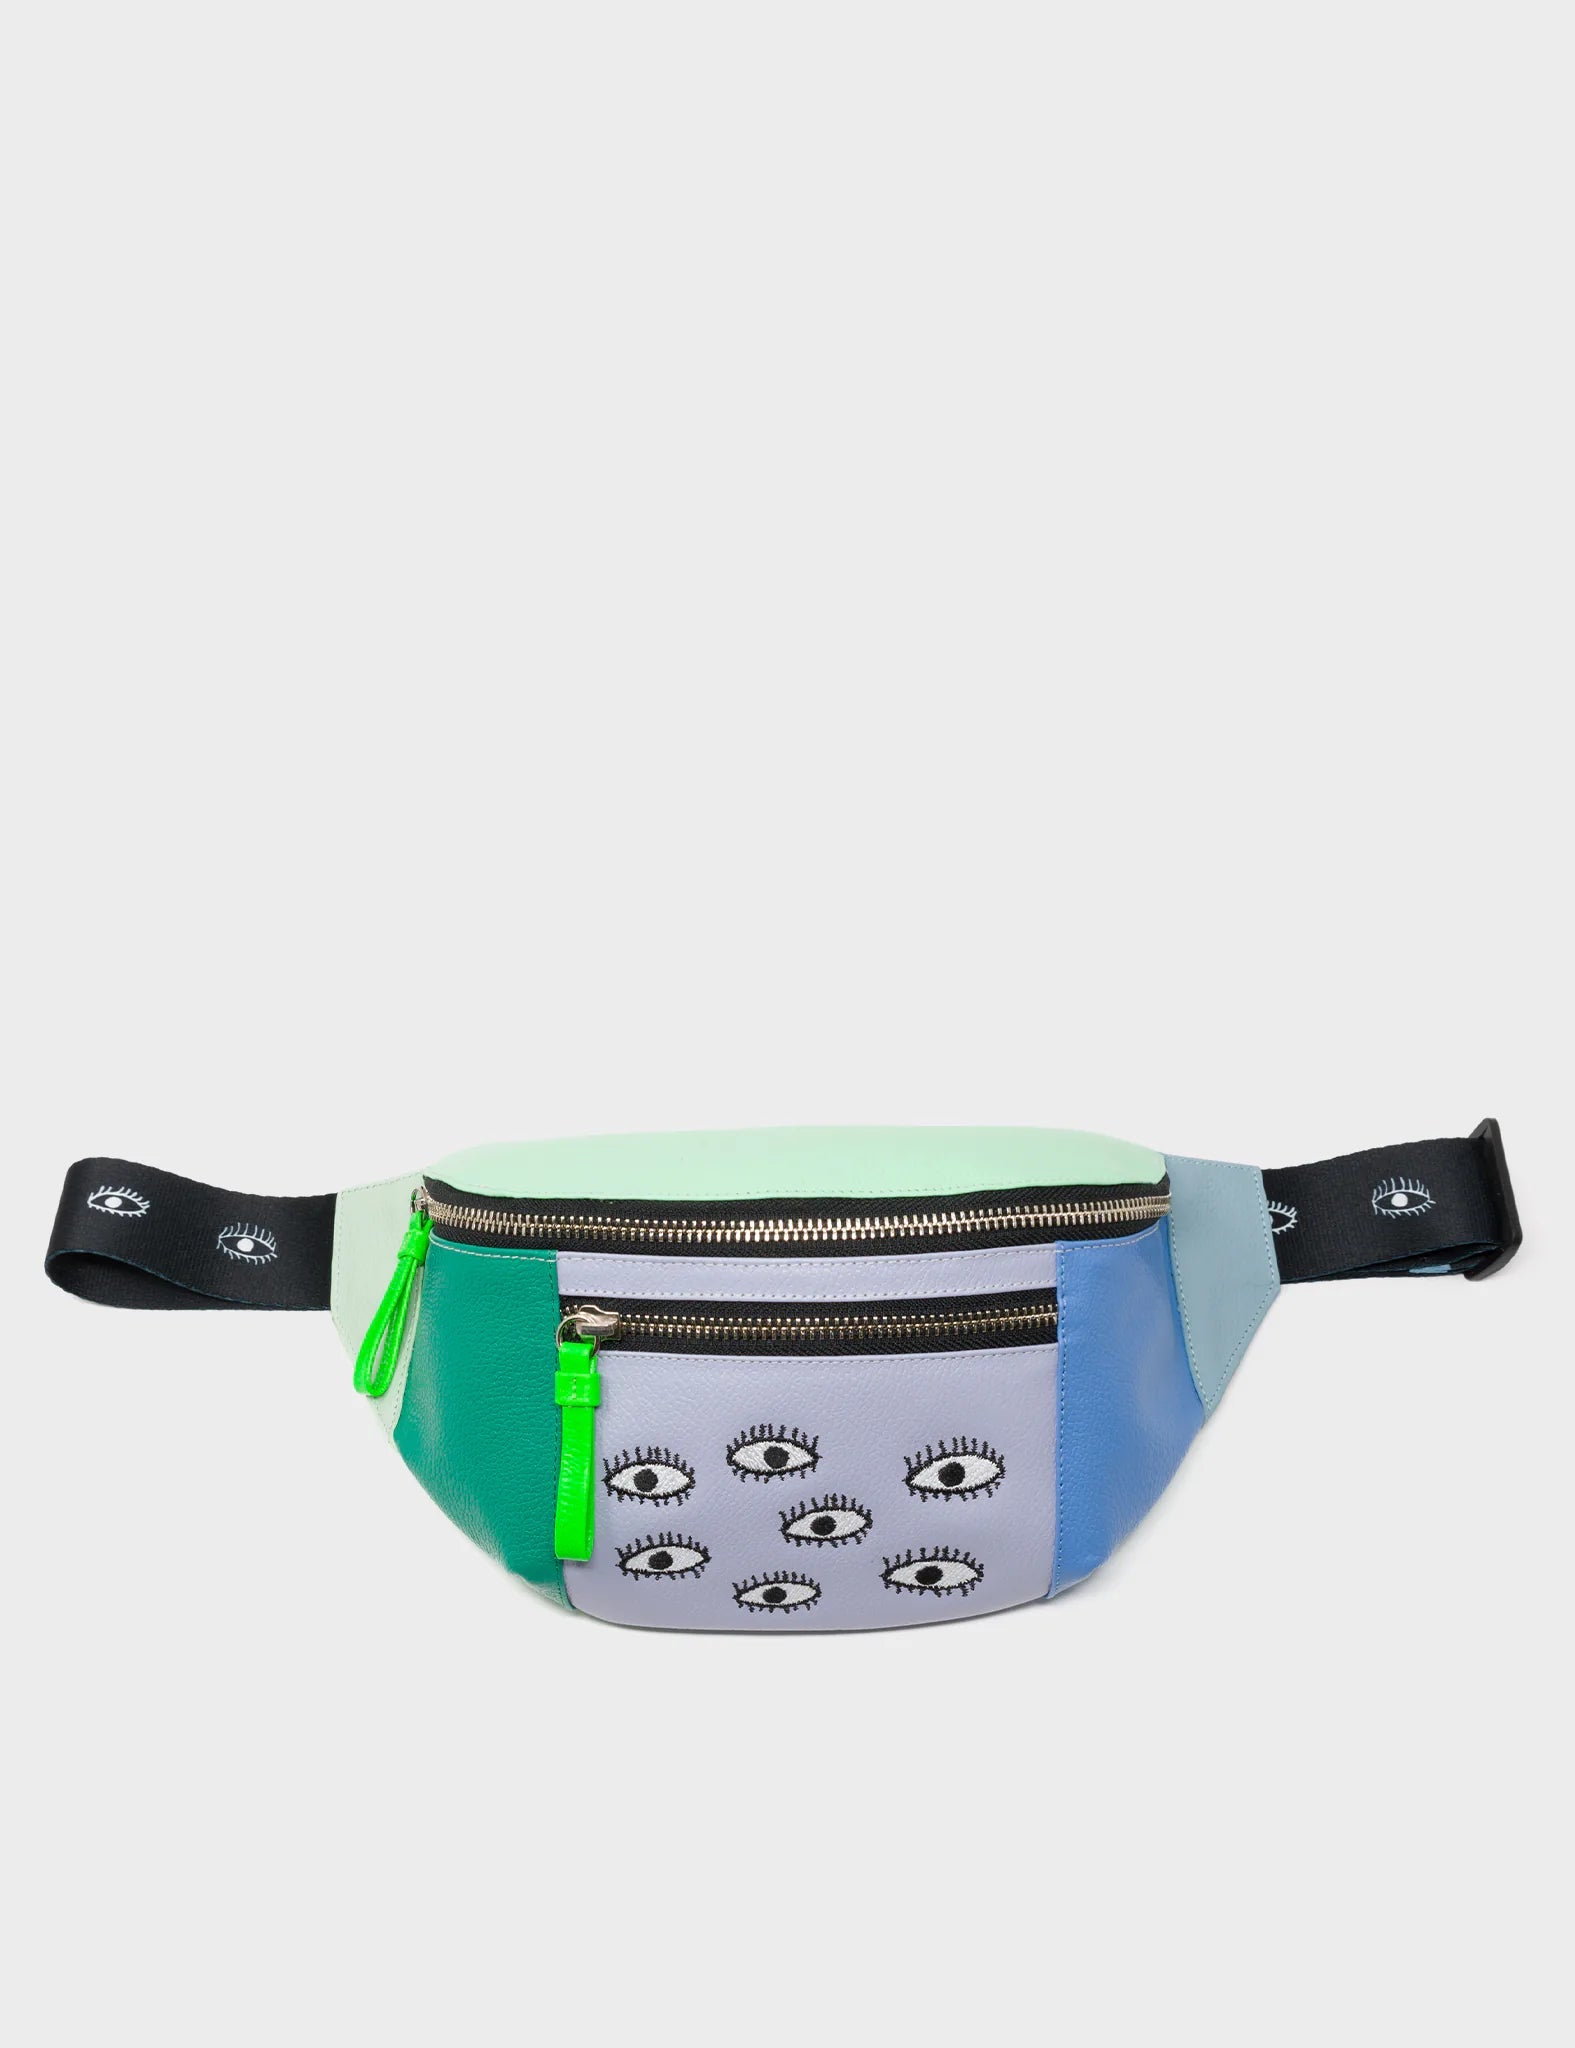 Harold Fanny Pack Green and Blue Leather - Eyes Embroidery - front